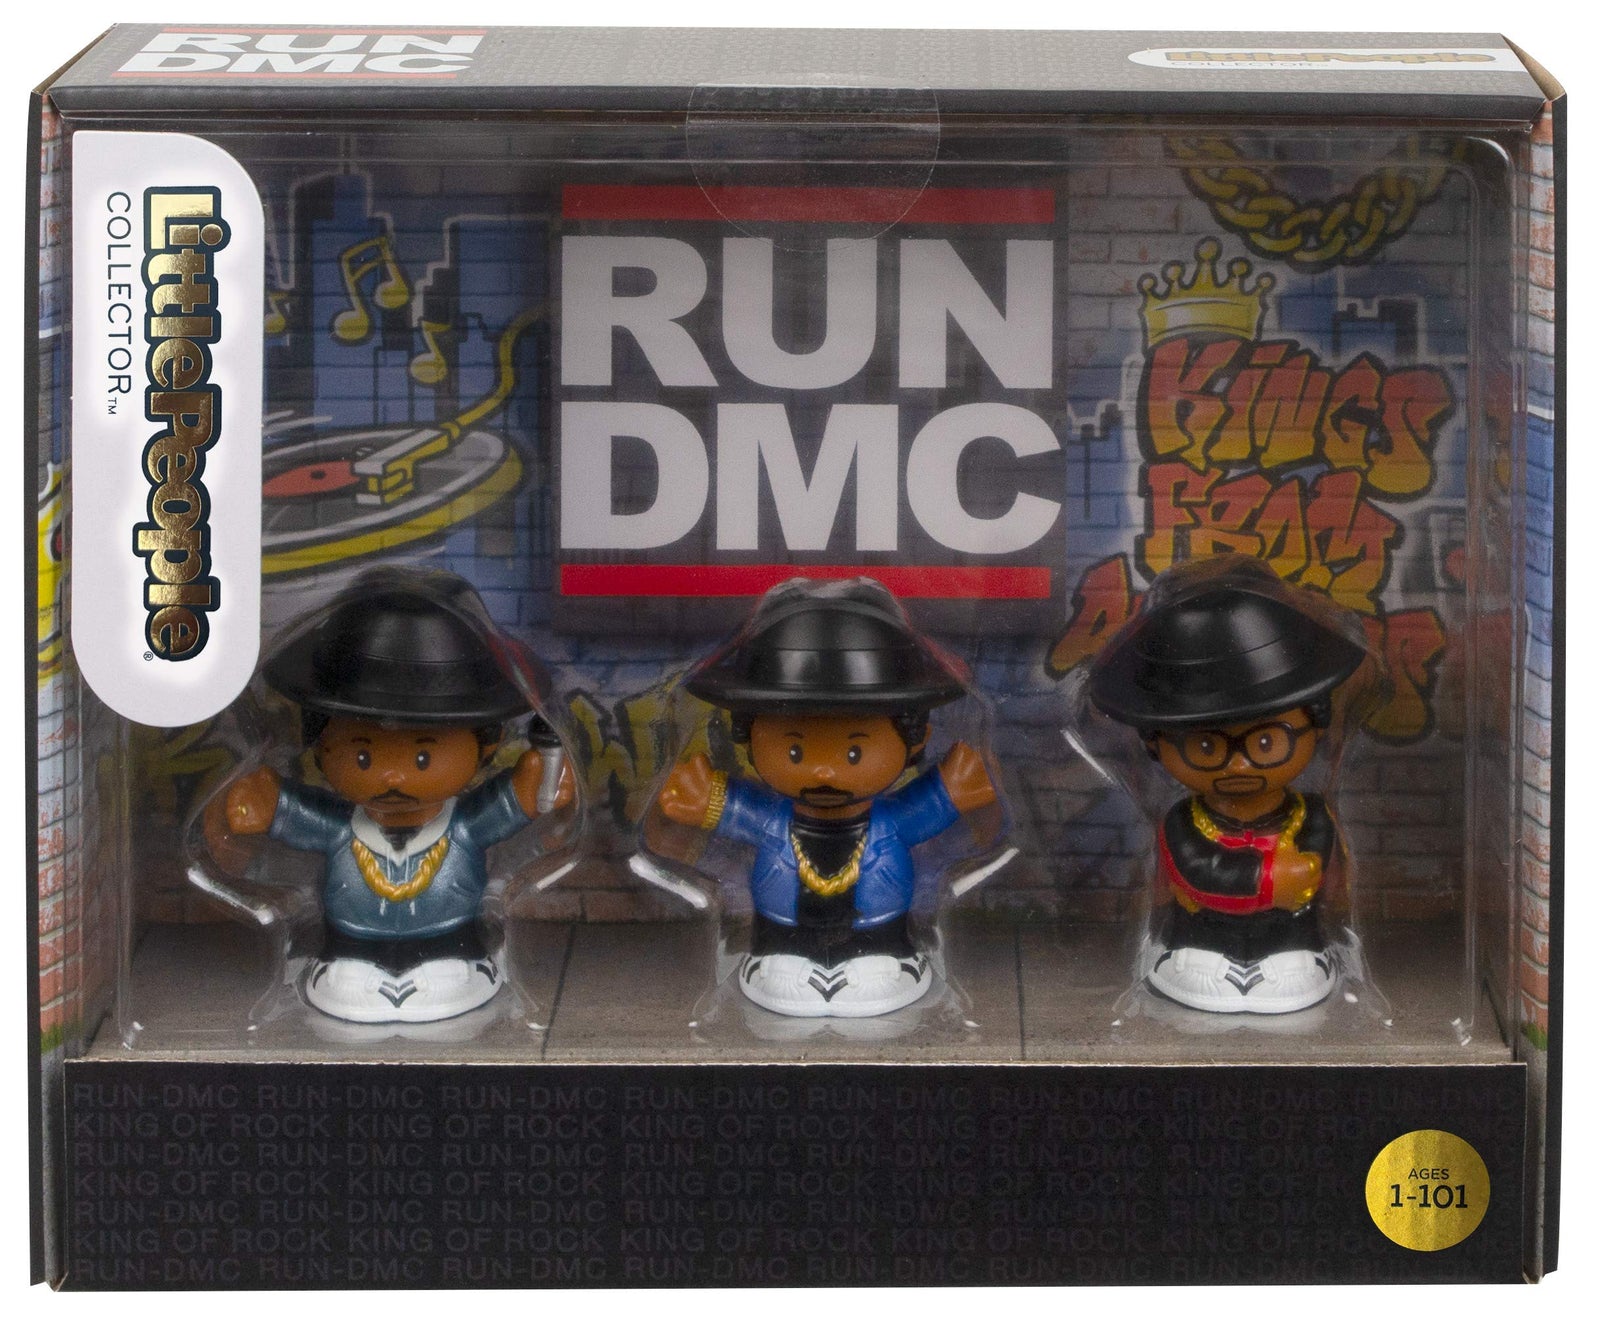 Fisher-Price Little People Collector Run DMC, Set of 3 Figures Styled Like The Iconic Hip Hop Group for Fans Ages 1-101 [Amazon Exclusive]